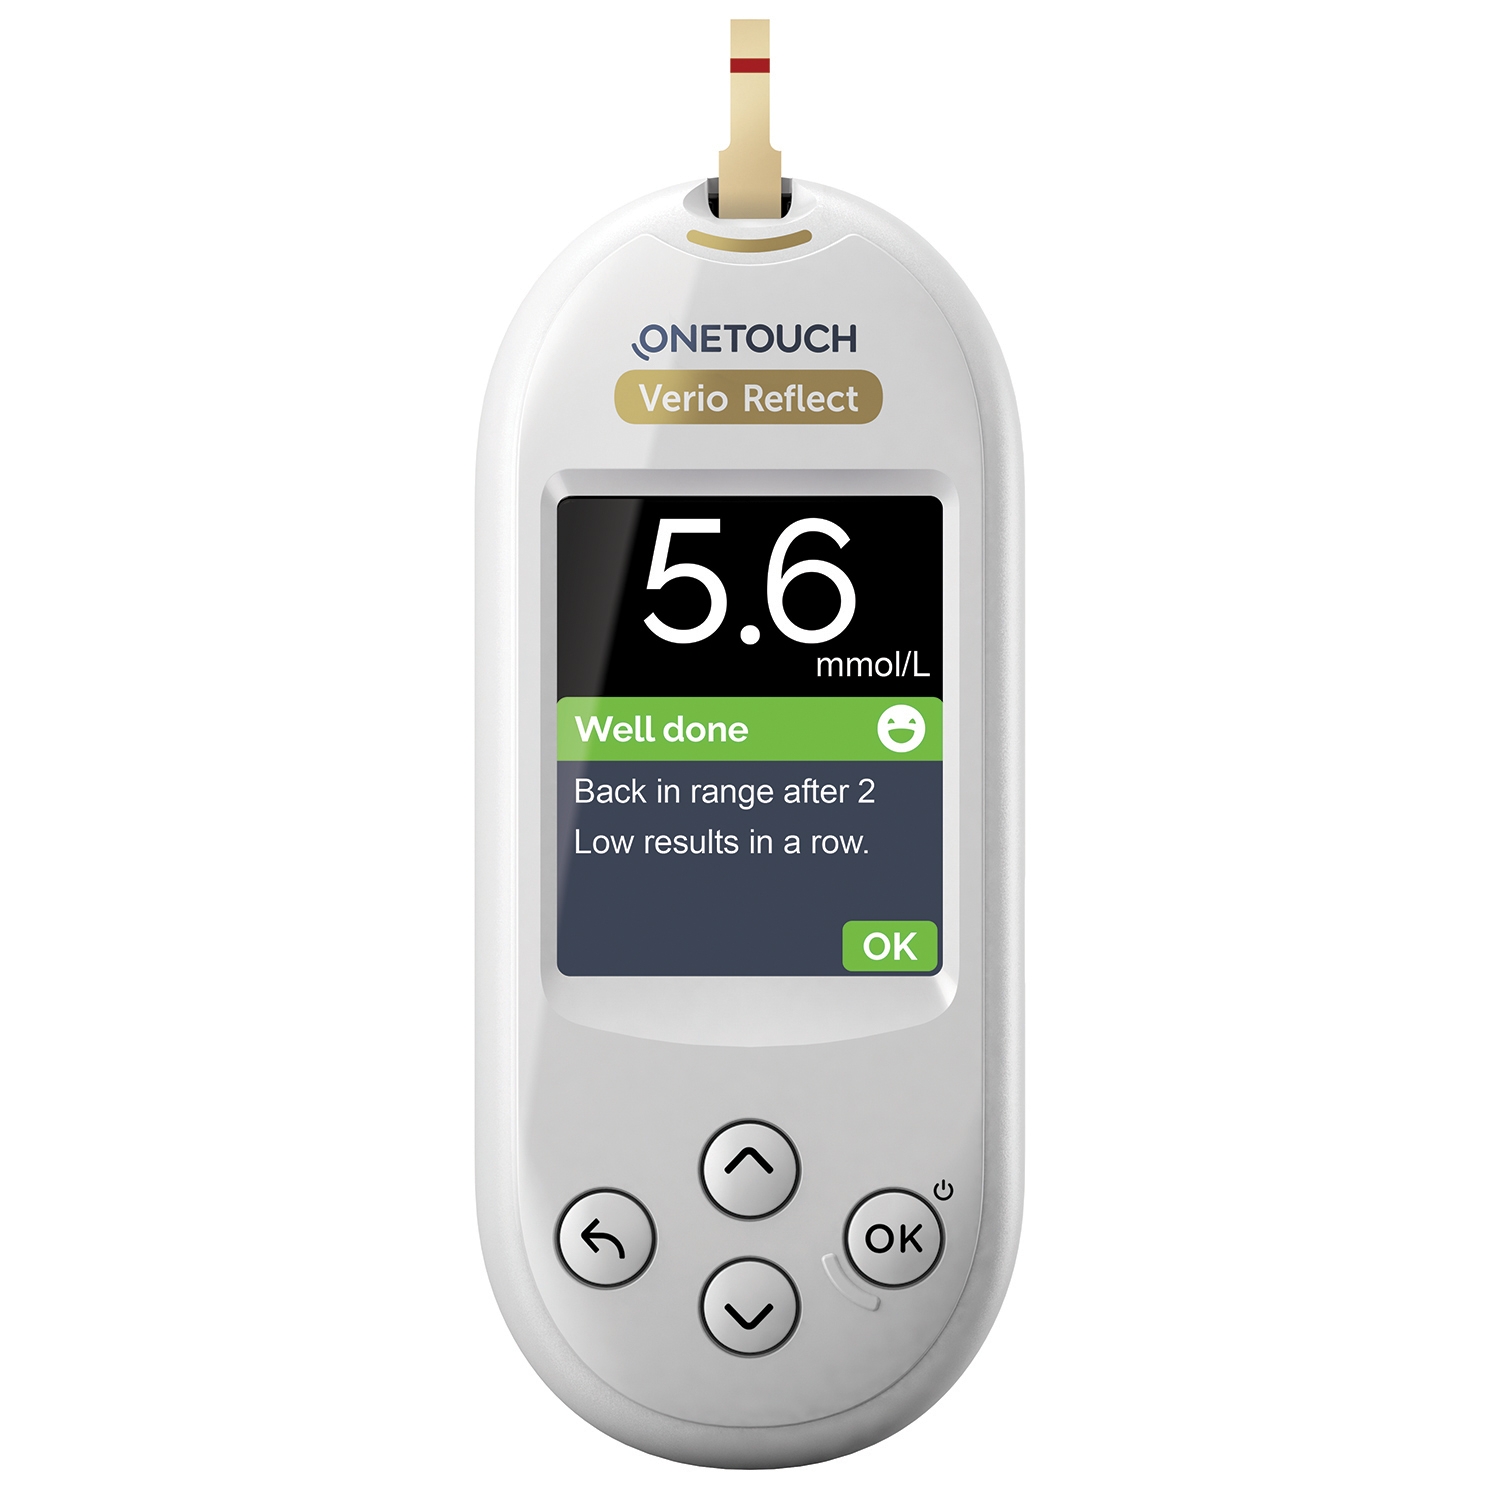 One touch Verio reflect glucometer startkit